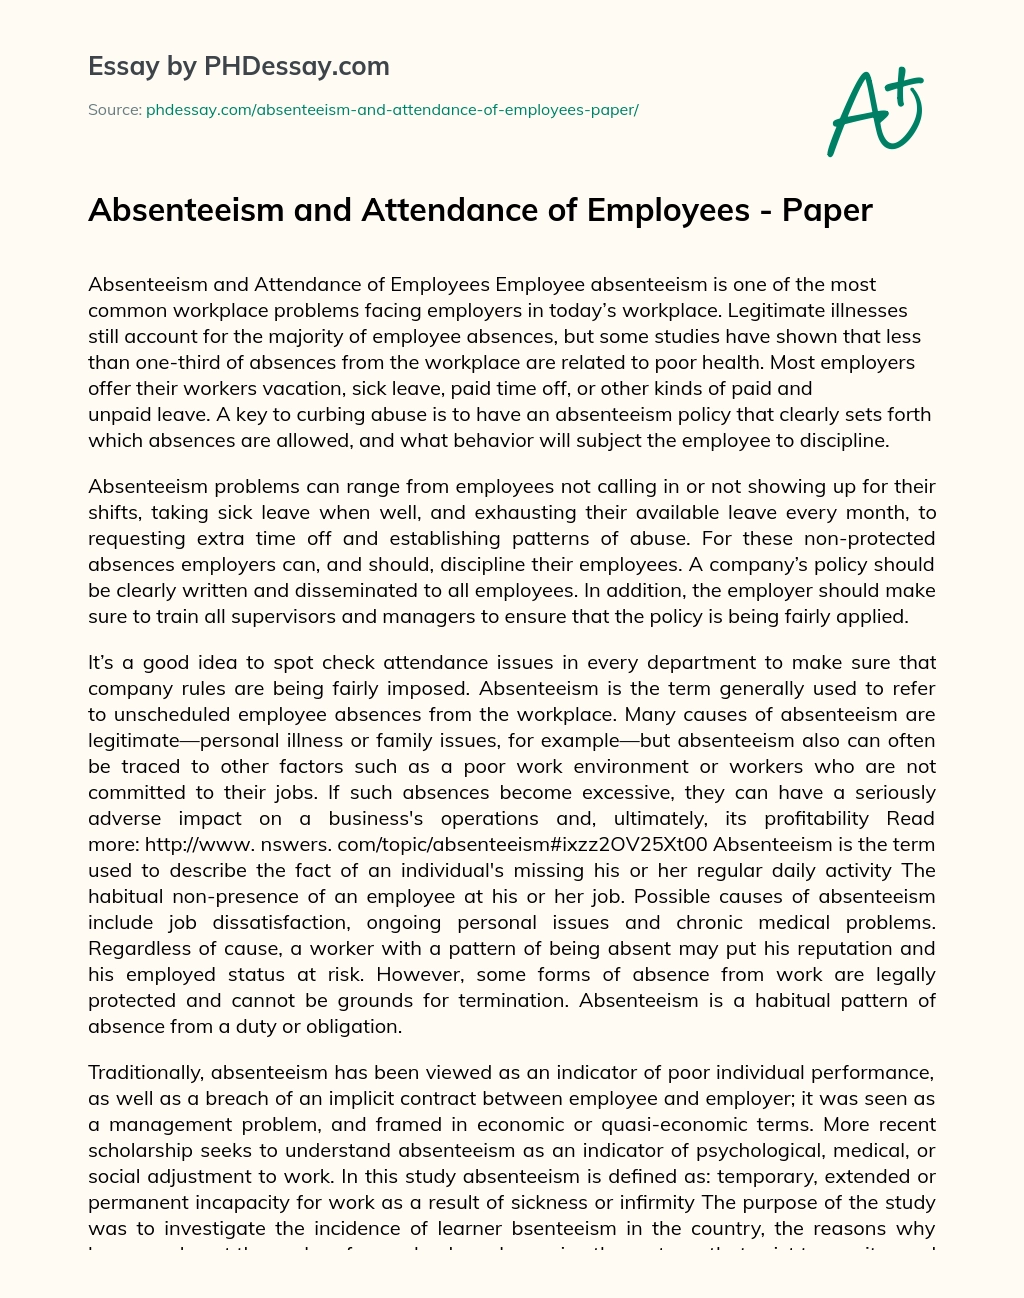 Absenteeism and Attendance of Employees – Paper essay